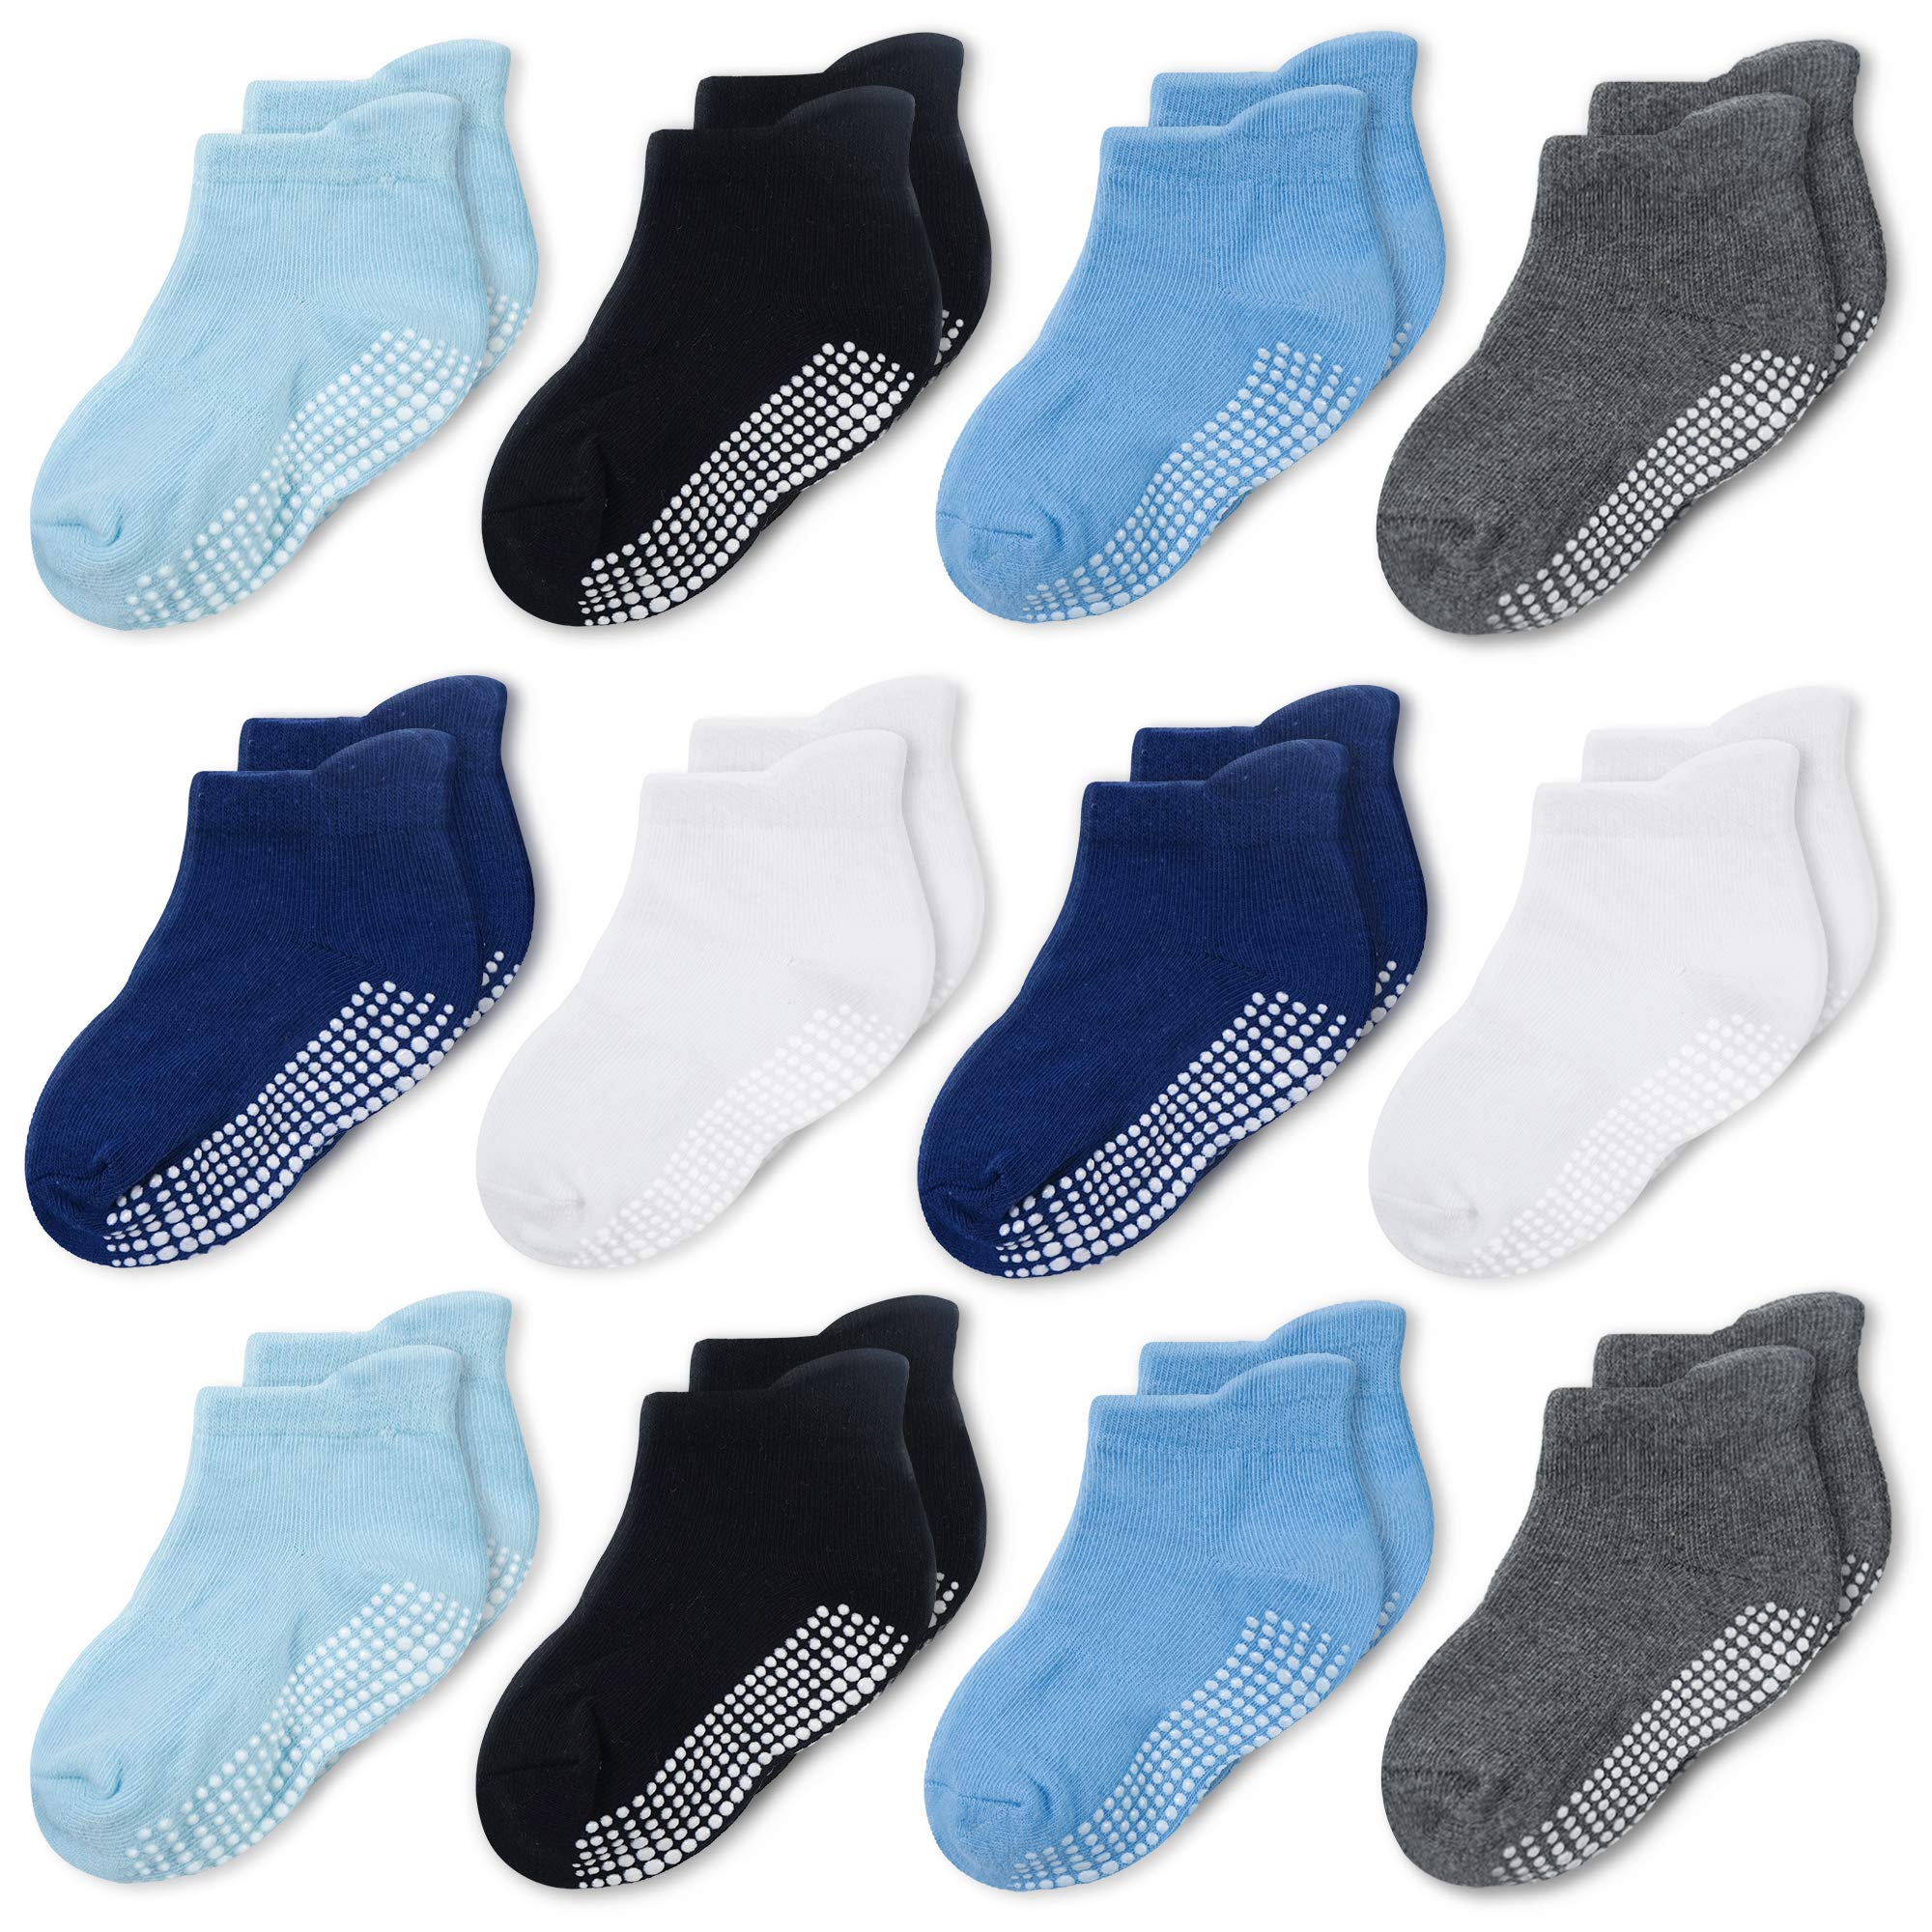 Cozyway Non-Slip Socks With Grippers - Ankle Style For Little Girls And Boys, Infants, Toddlers, Children - Keep Your Little One